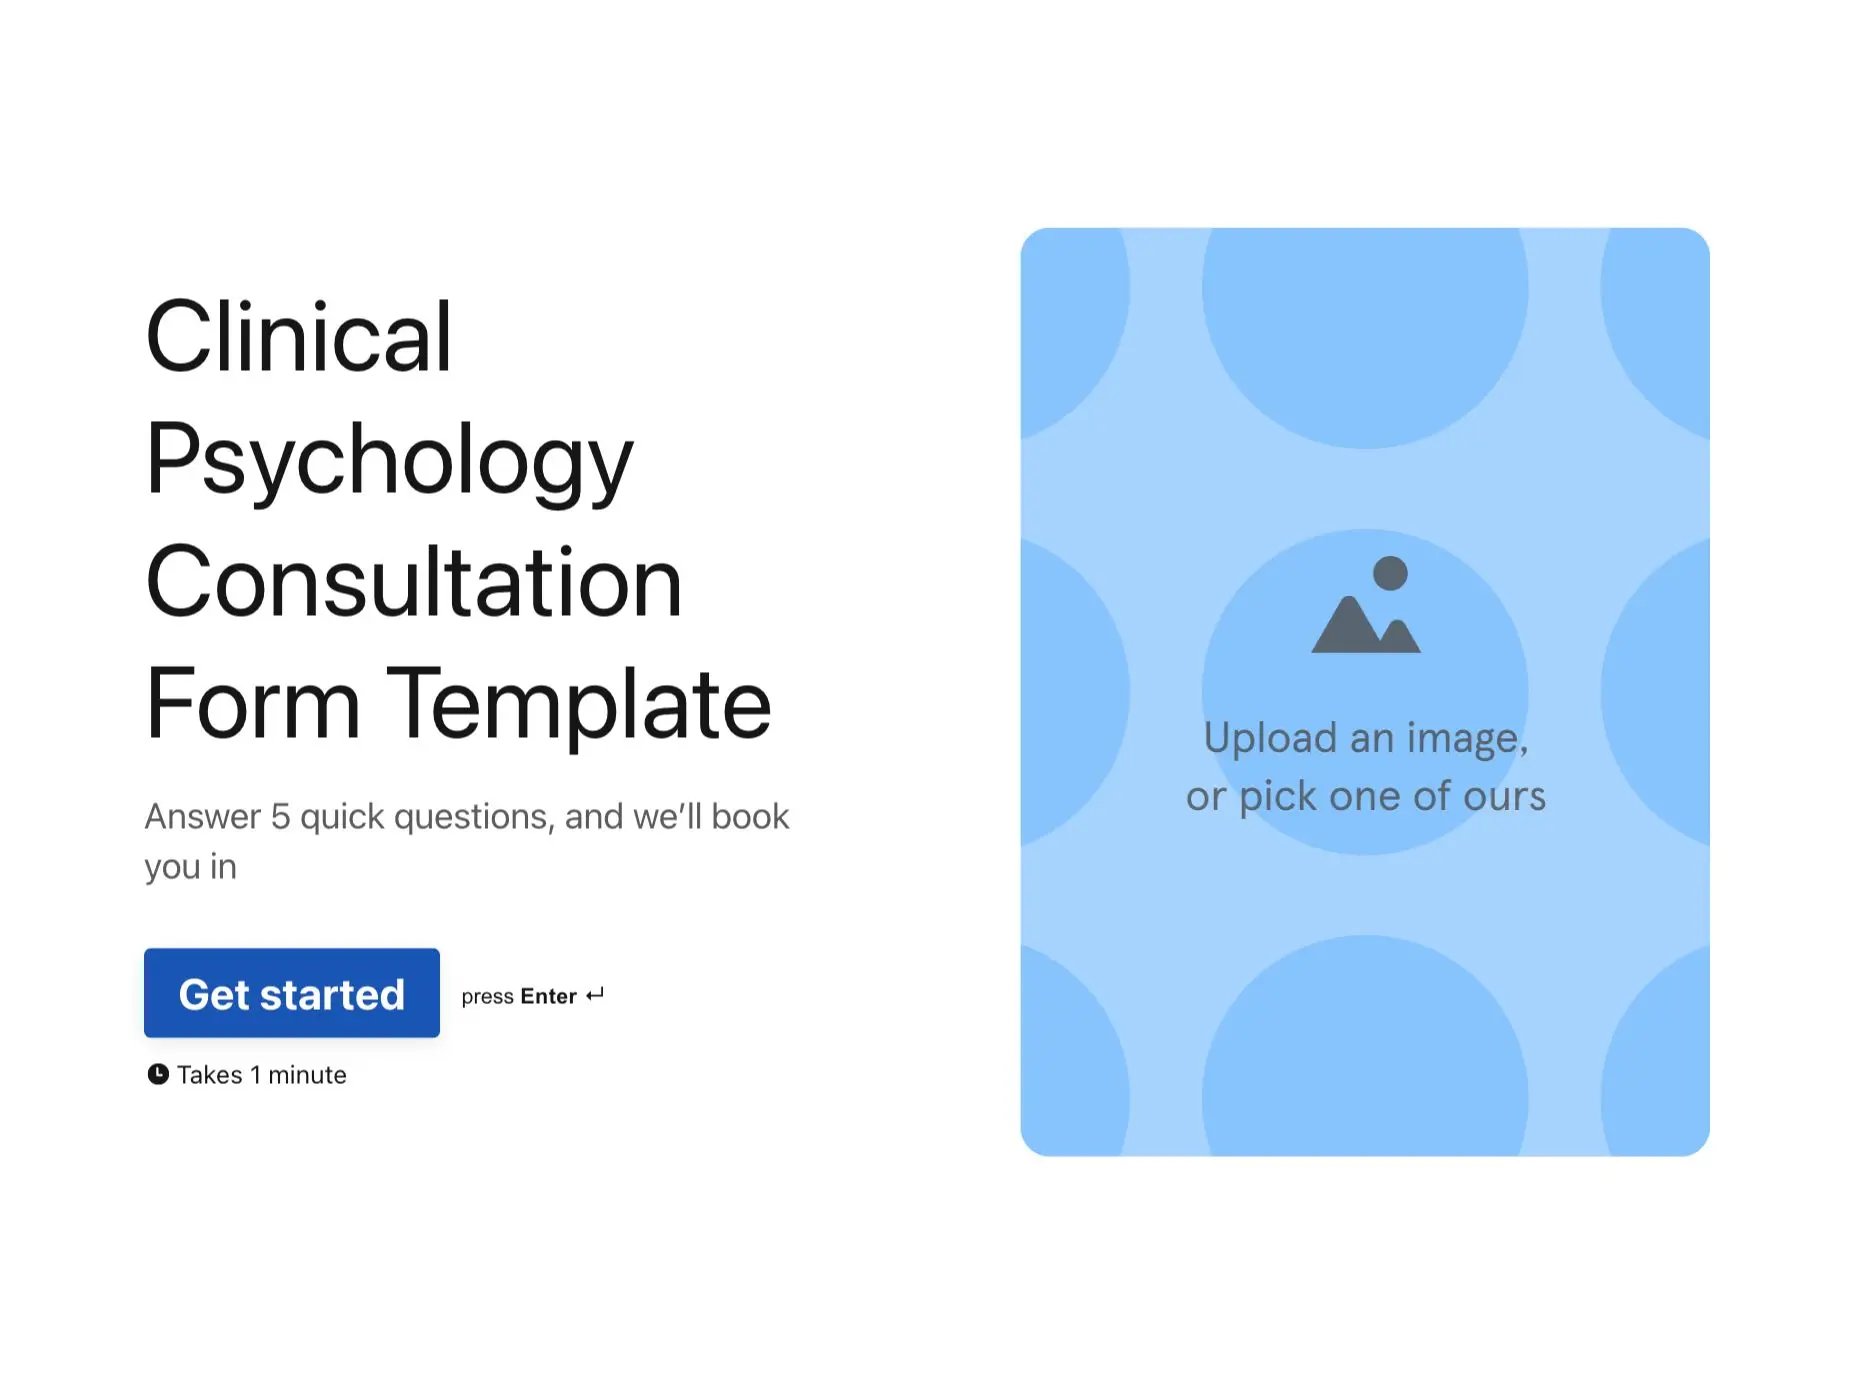 Clinical Psychology Consultation Form Template Hero